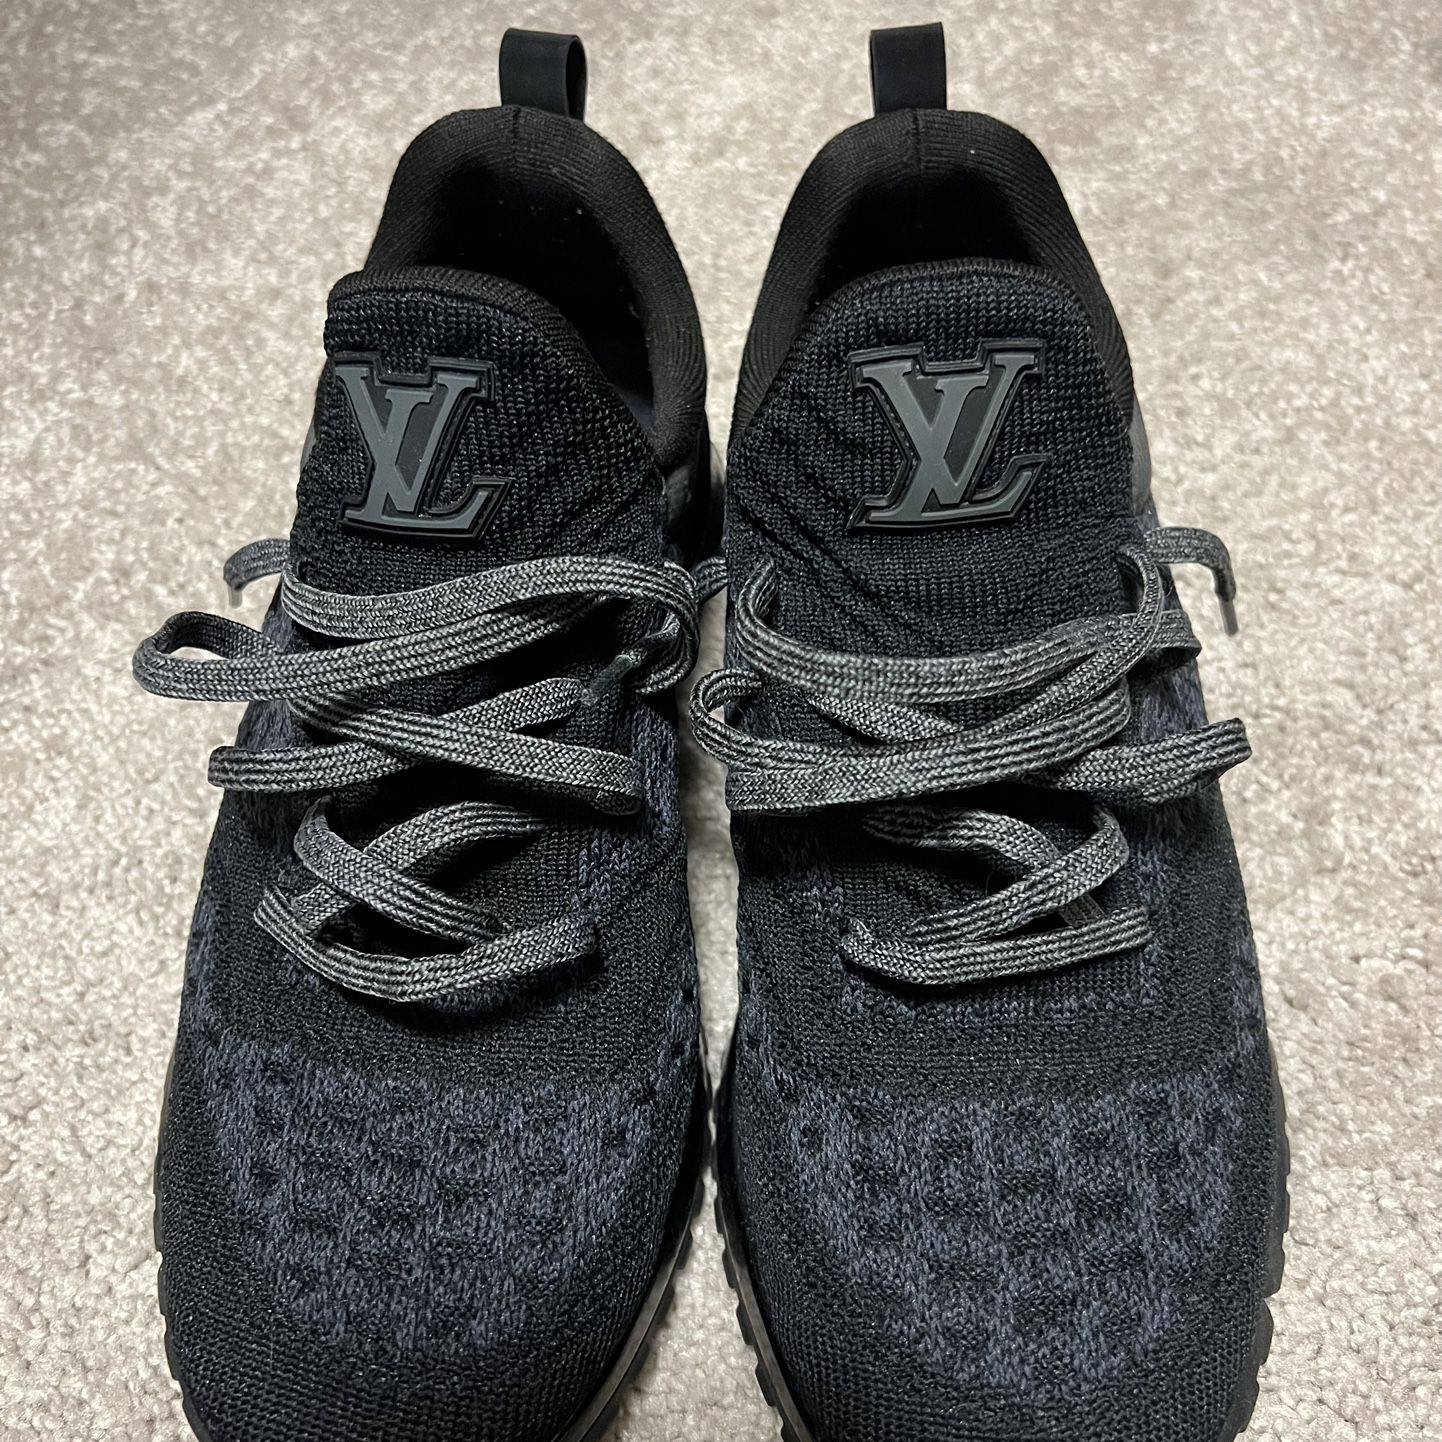 Louis Vuitton Sneakers for Sale in Champions Gt, FL - OfferUp